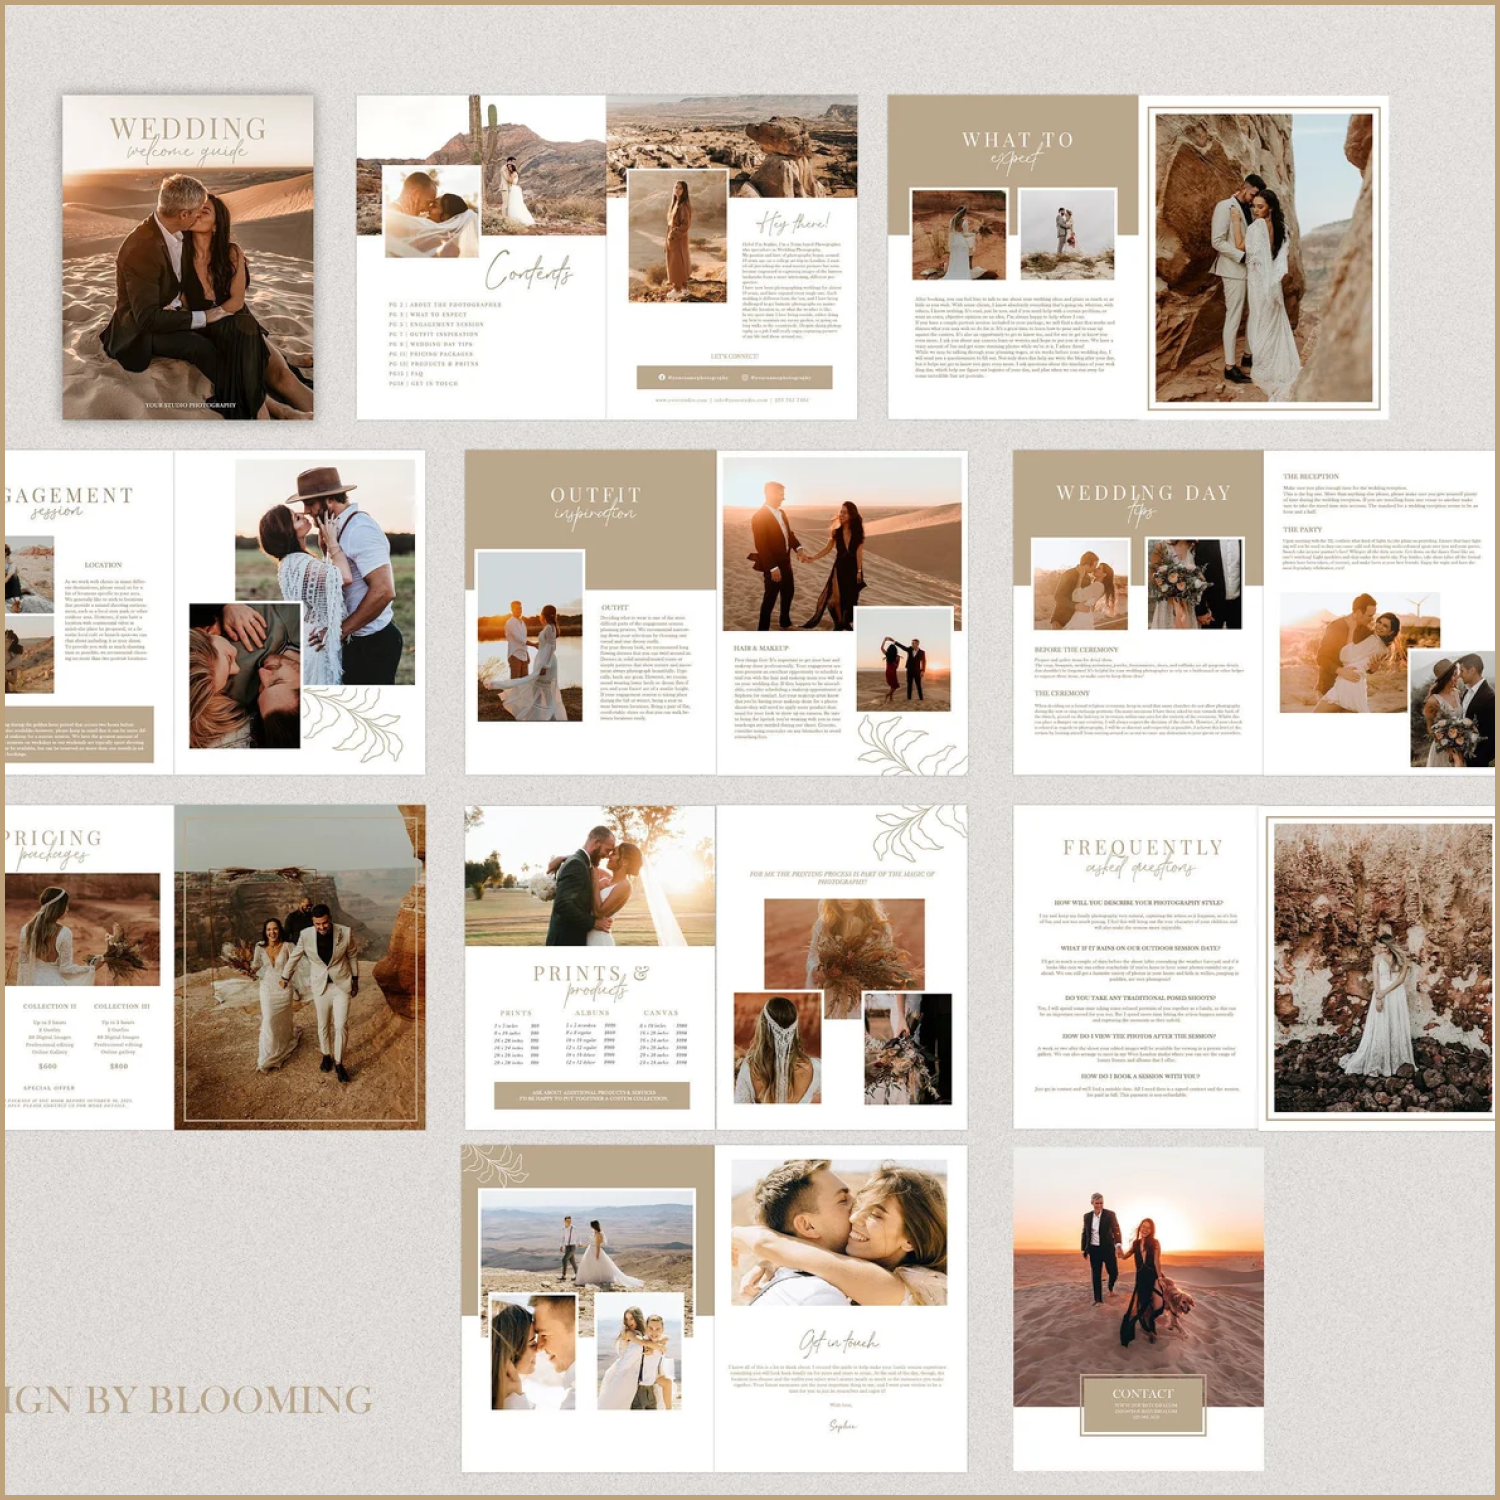 Prints of wedding welcome guide.